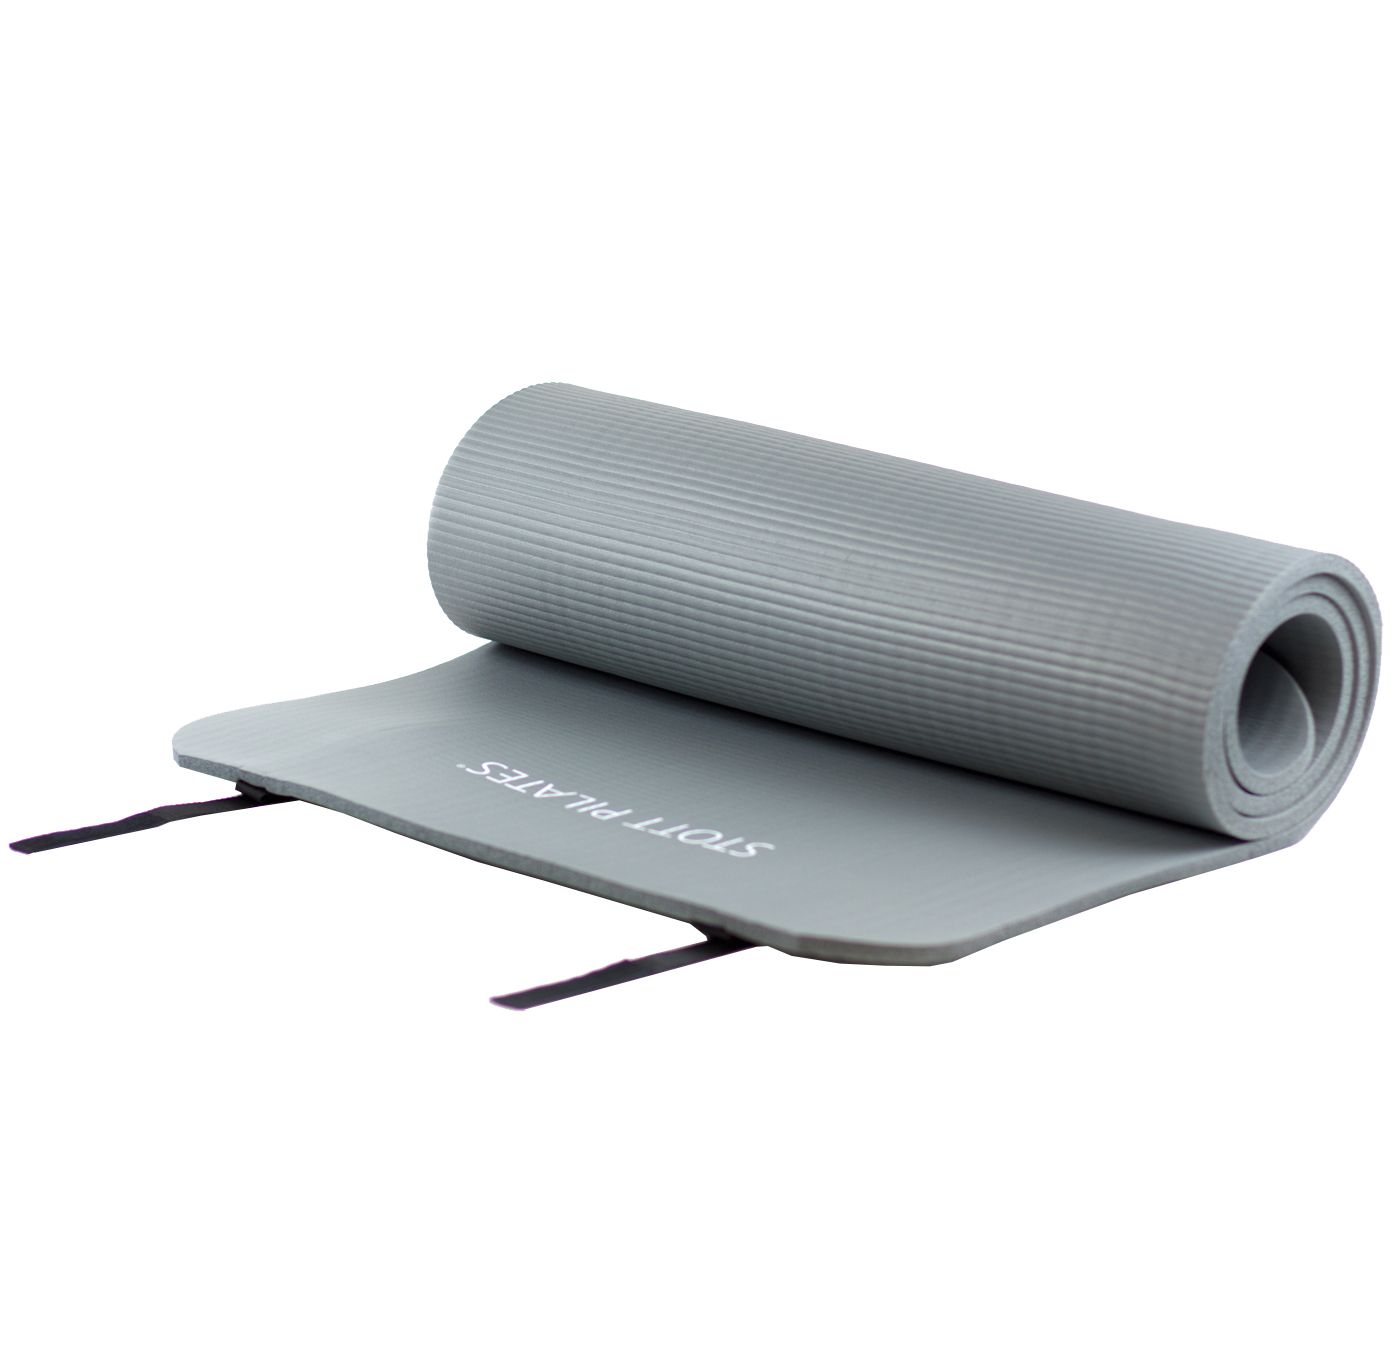 Deluxe Studio Extra Thick Yoga Mat - 10 Pack